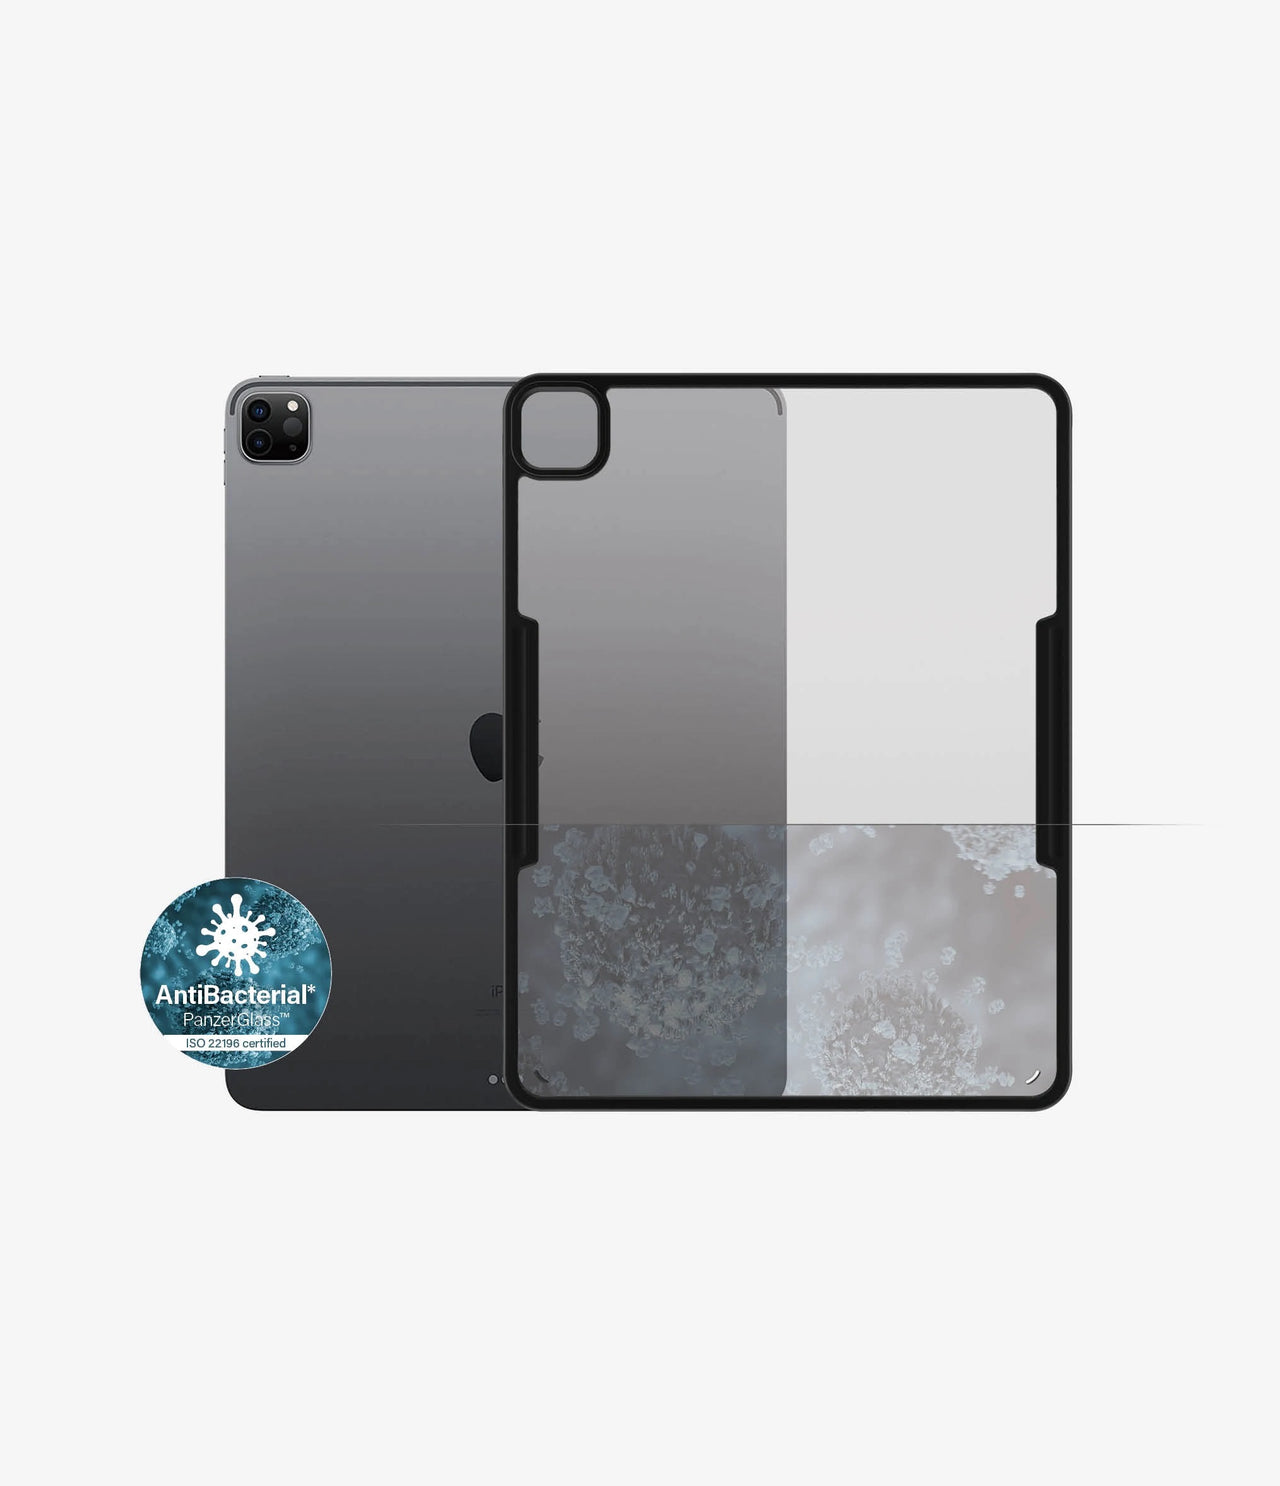 Panzer Glass Clear Case for Apple iPad Pro 12.9" (2018/2020/2021) - Clear